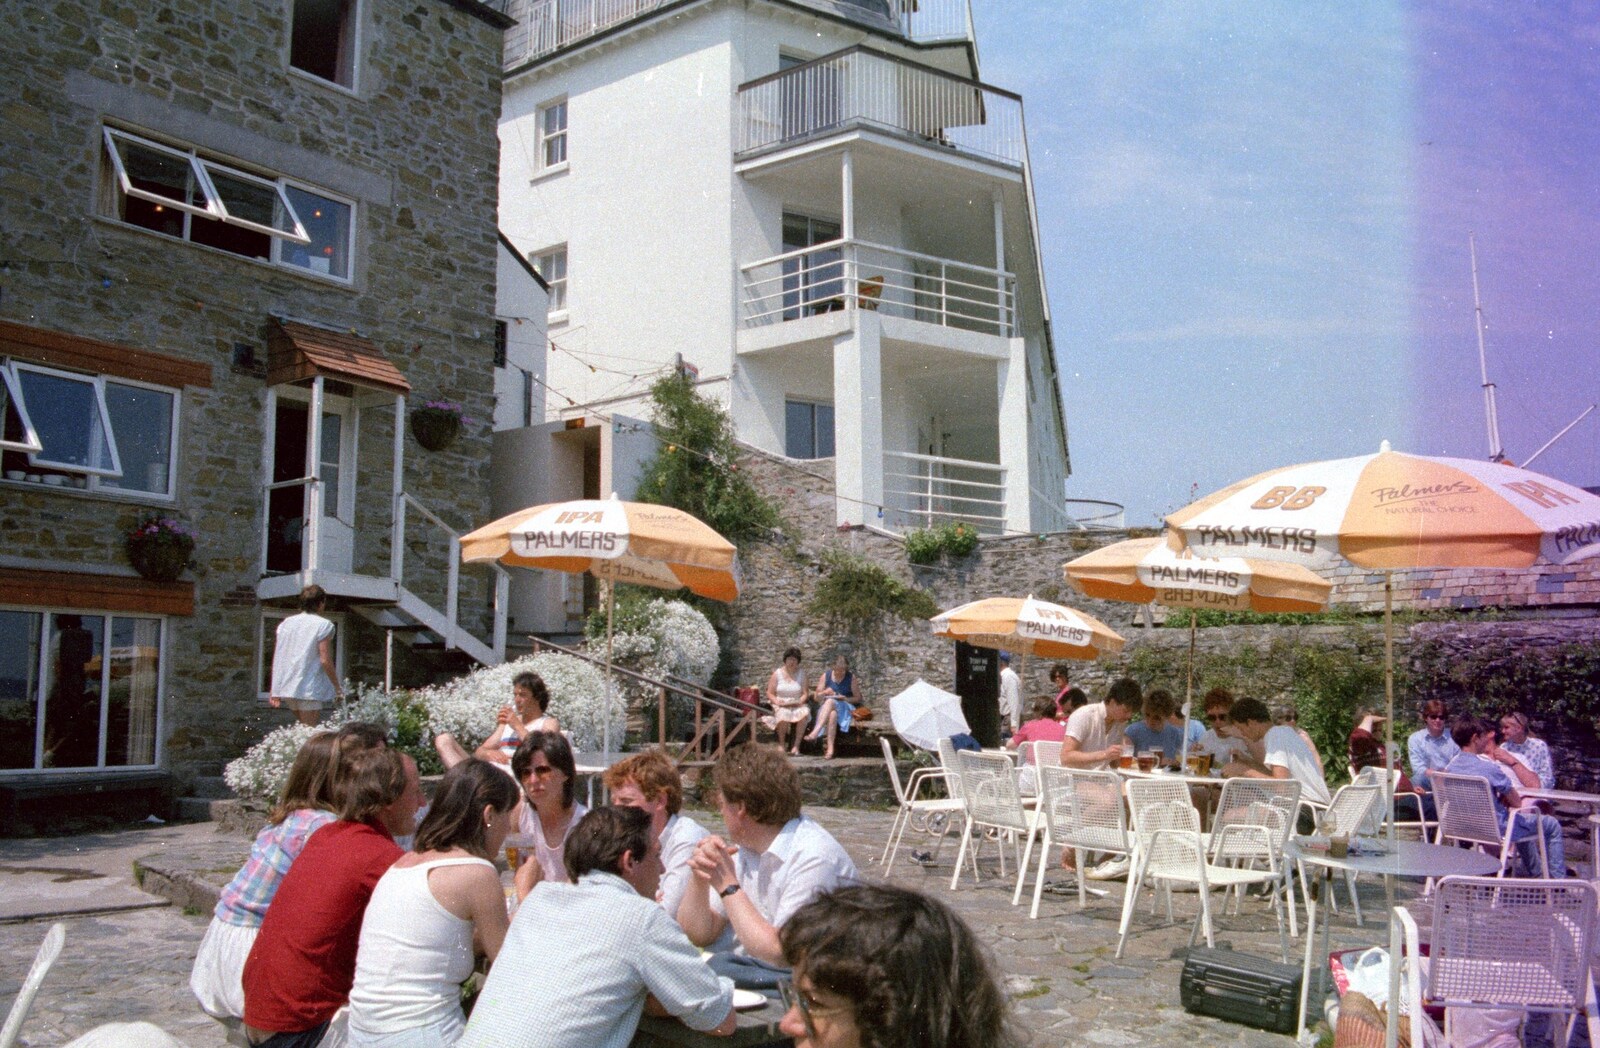 A pub in Salcombe from Uni: Twenty One Guns and Footie on the Beach, Plymouth Hoe and Salcombe, Devon - 15th June 1986